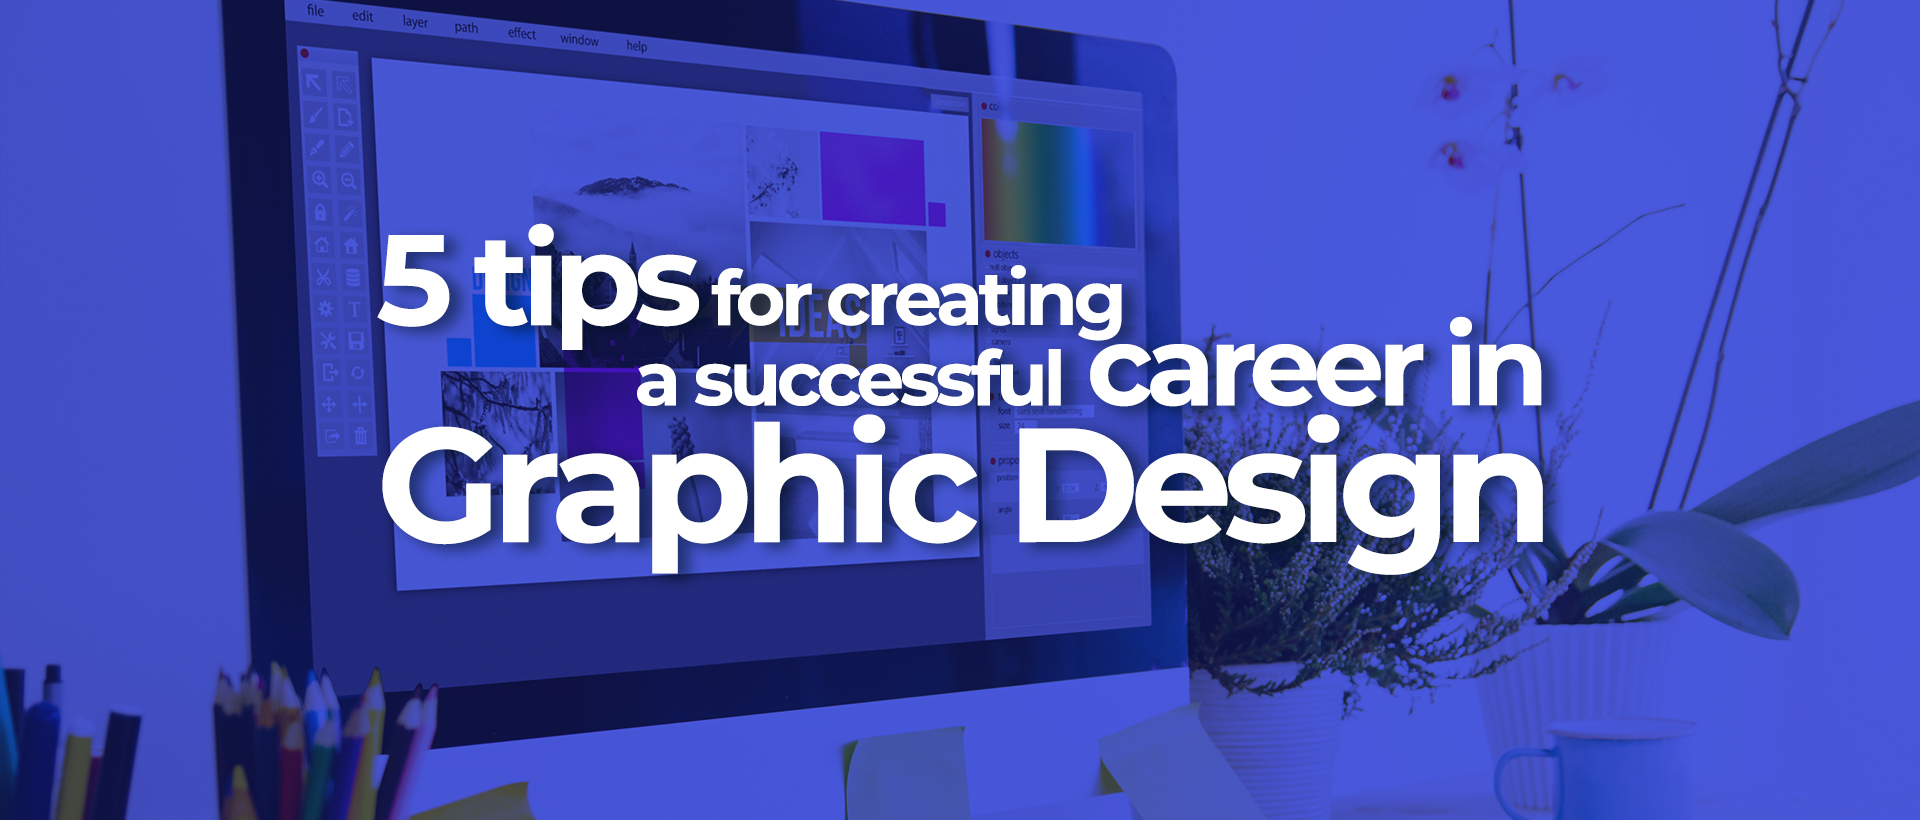 5 tips for creating a successful career in Graphic Design